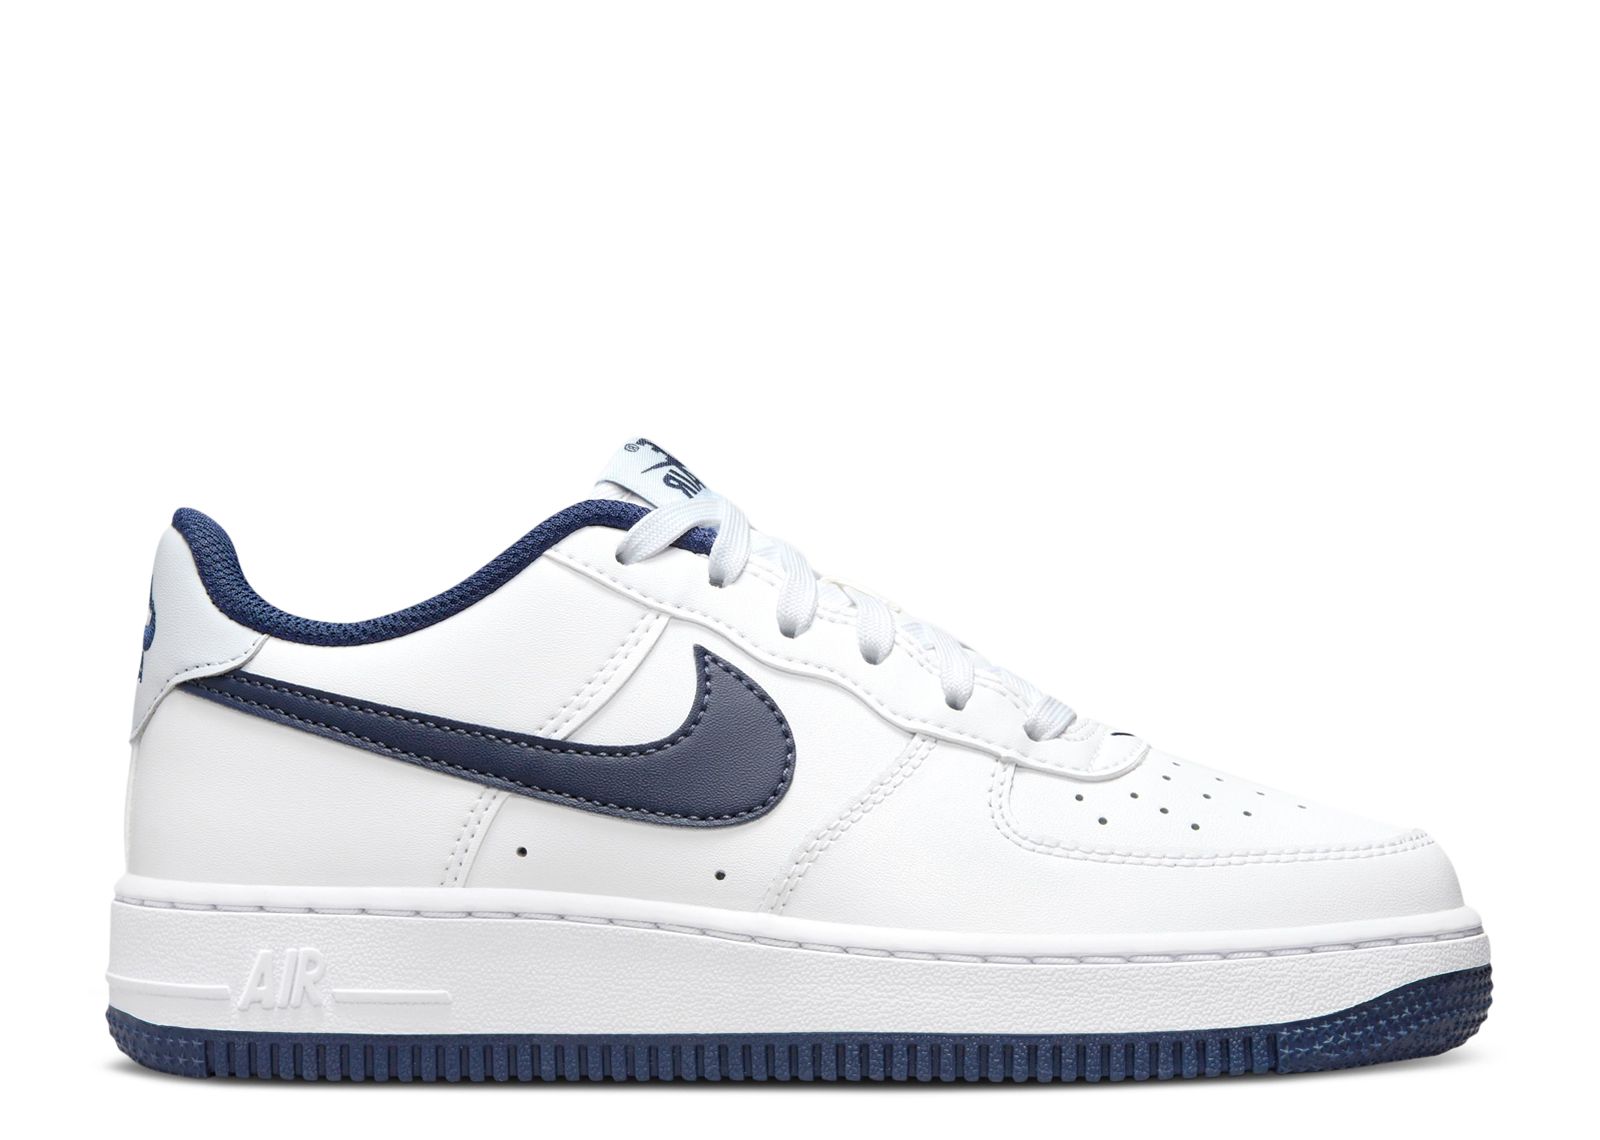 Кроссовки Nike Air Force 1 Gs 'White Midnight Navy', белый new nike air force 1 script swoosh women white skateboarding shoes original light weight outdoor sports sneakers